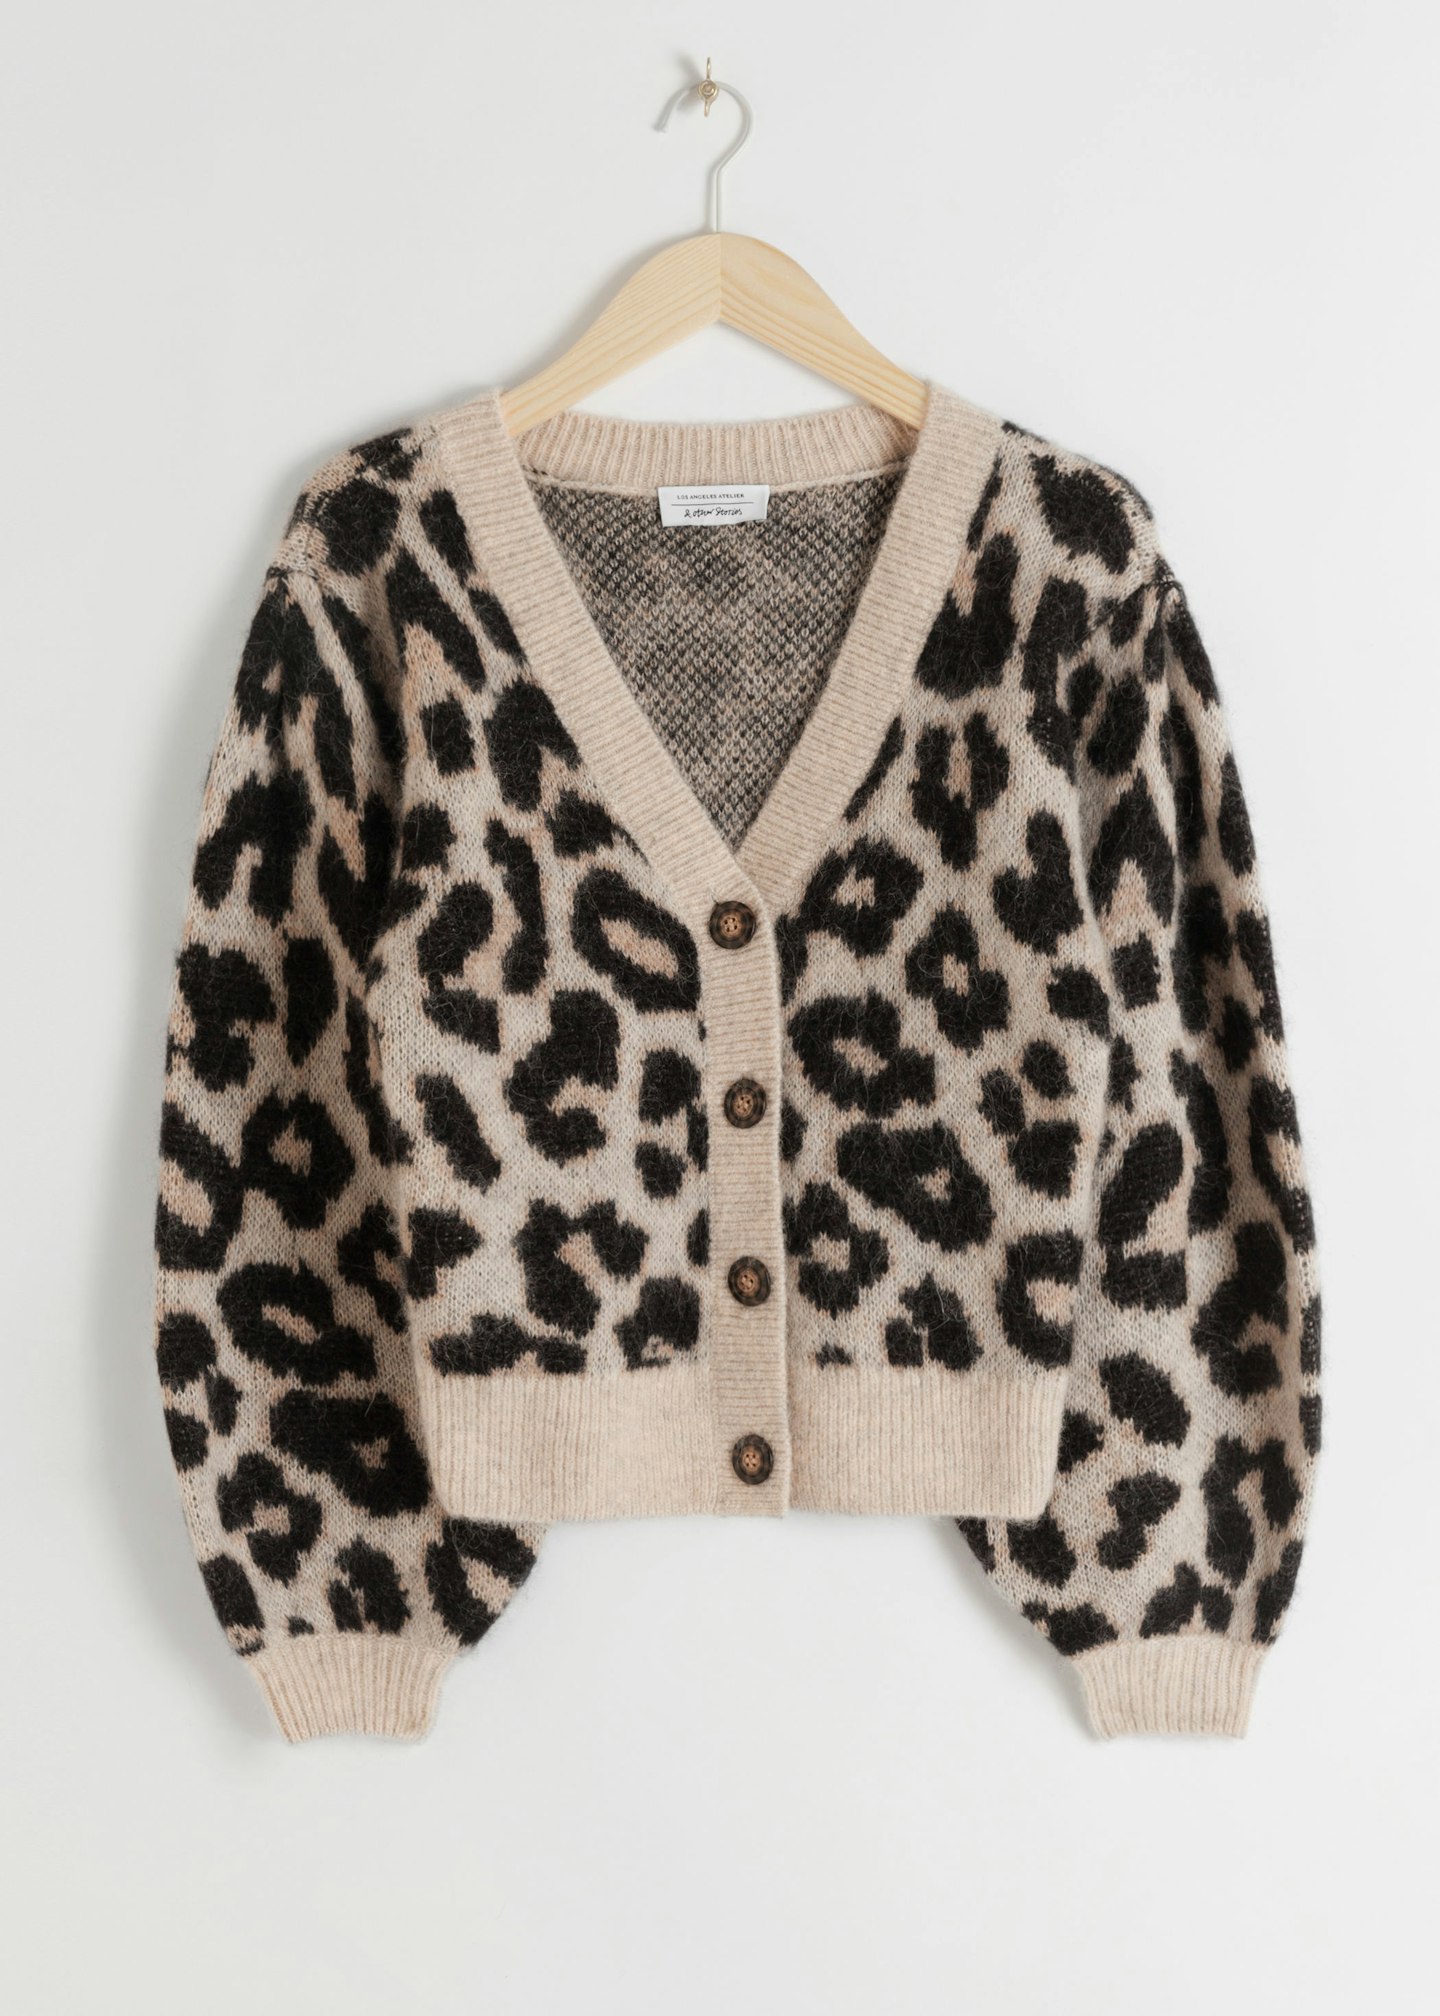 & Other Stories, Leopard Puff Sleeve Wool Blend Cardigan, £85